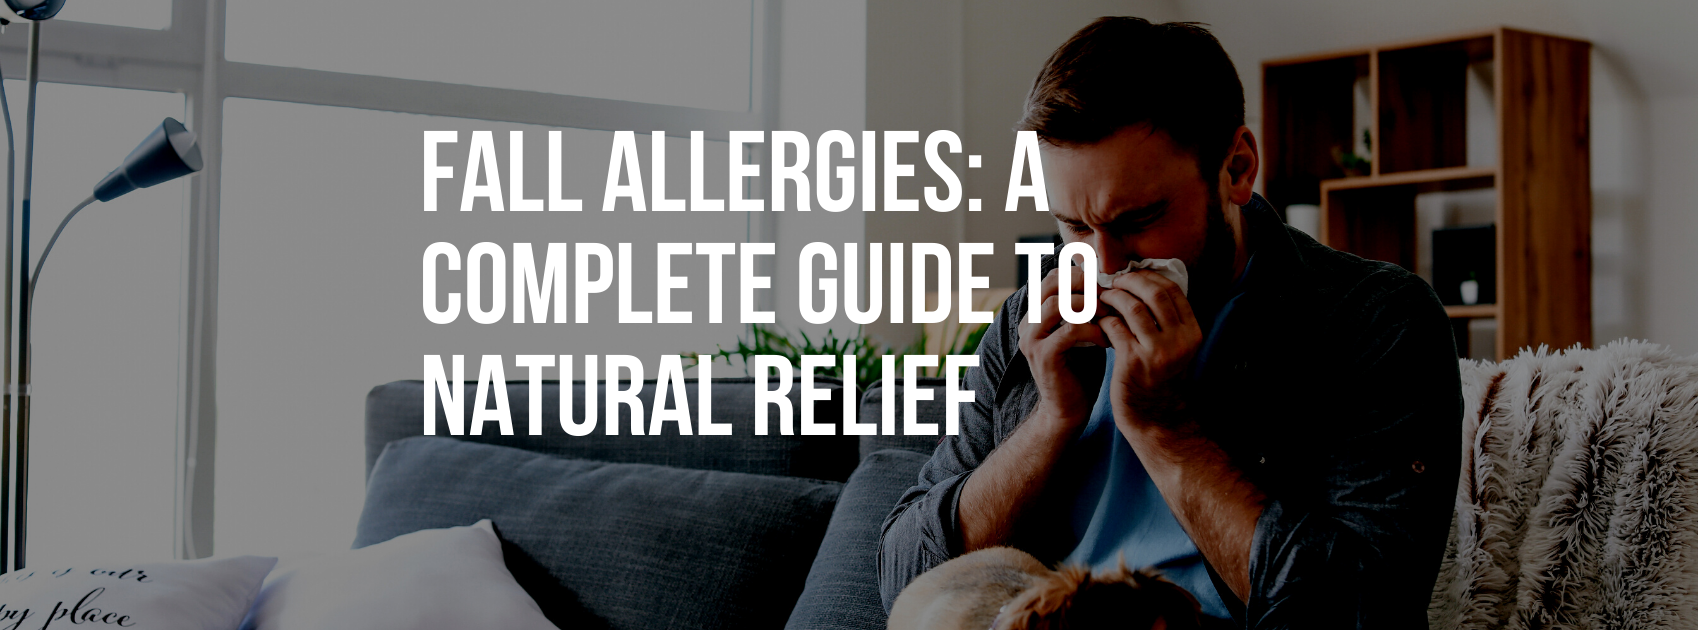 Fall Allergies: A Complete Guide to Natural Relief